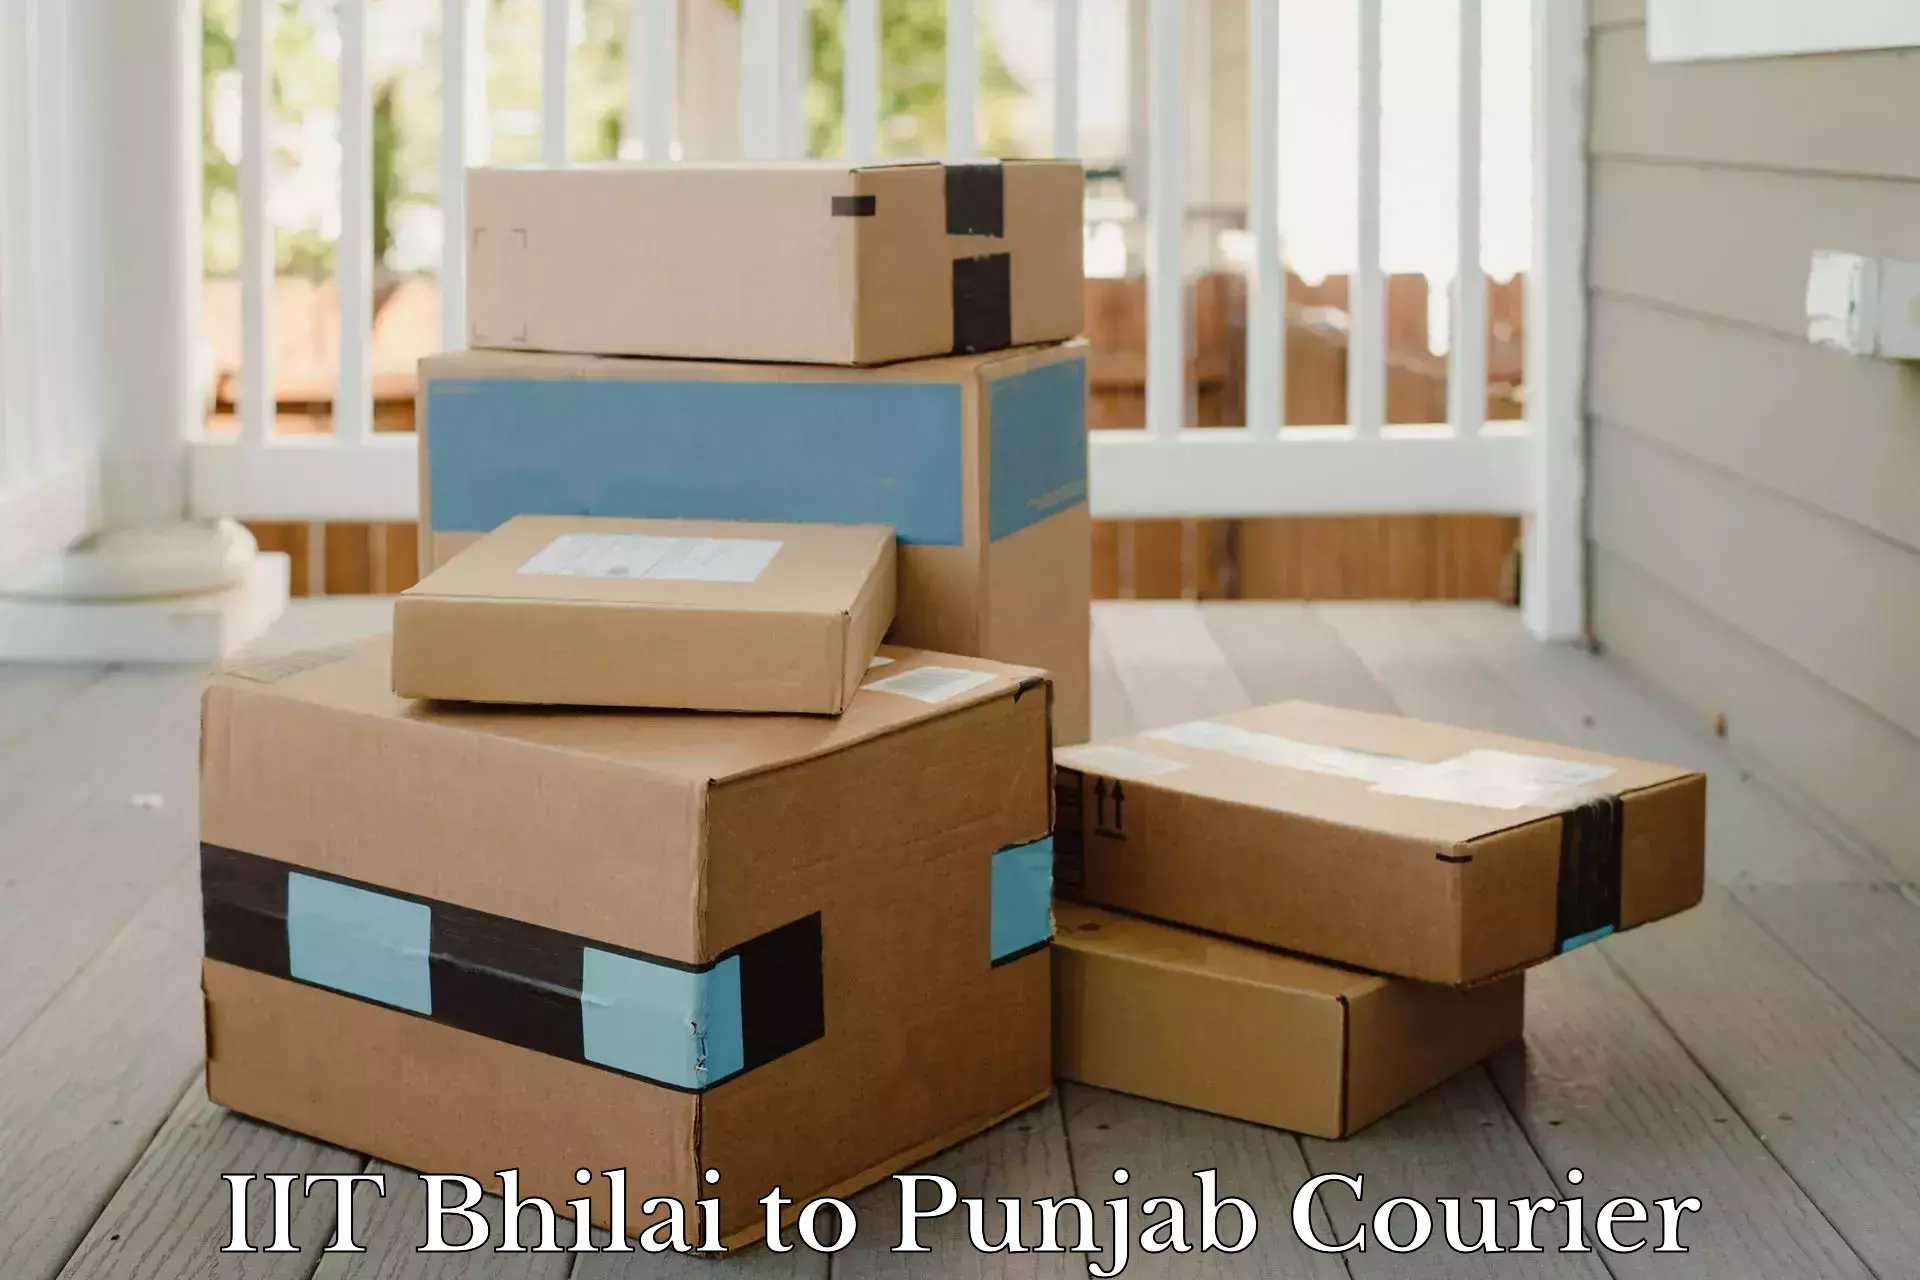 Personal courier services in IIT Bhilai to Talwara